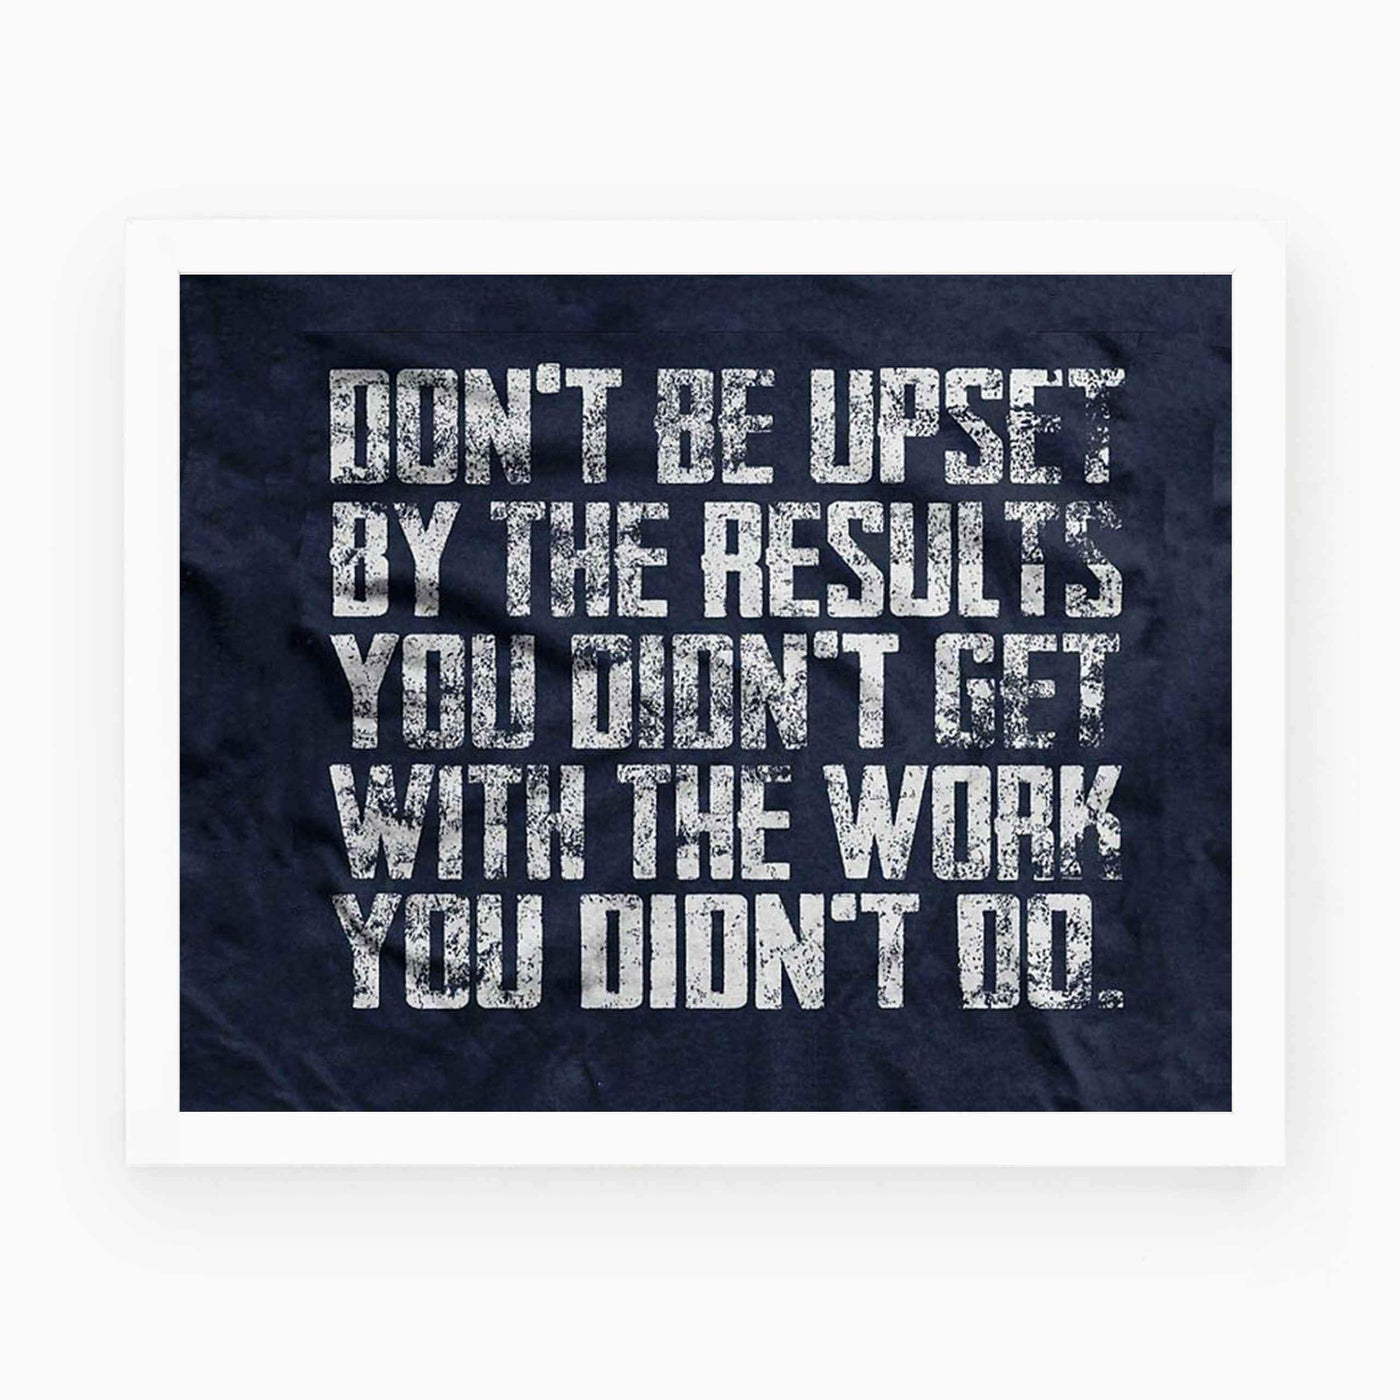 Don't Be Upset By The Results You Didn't Get With Work You Didn't Do-Motivational Wall Art-10 x 8" Distressed Poster Print-Ready to Frame. Perfect Home-School-Gym-Locker D?cor. Tough Love For Team!